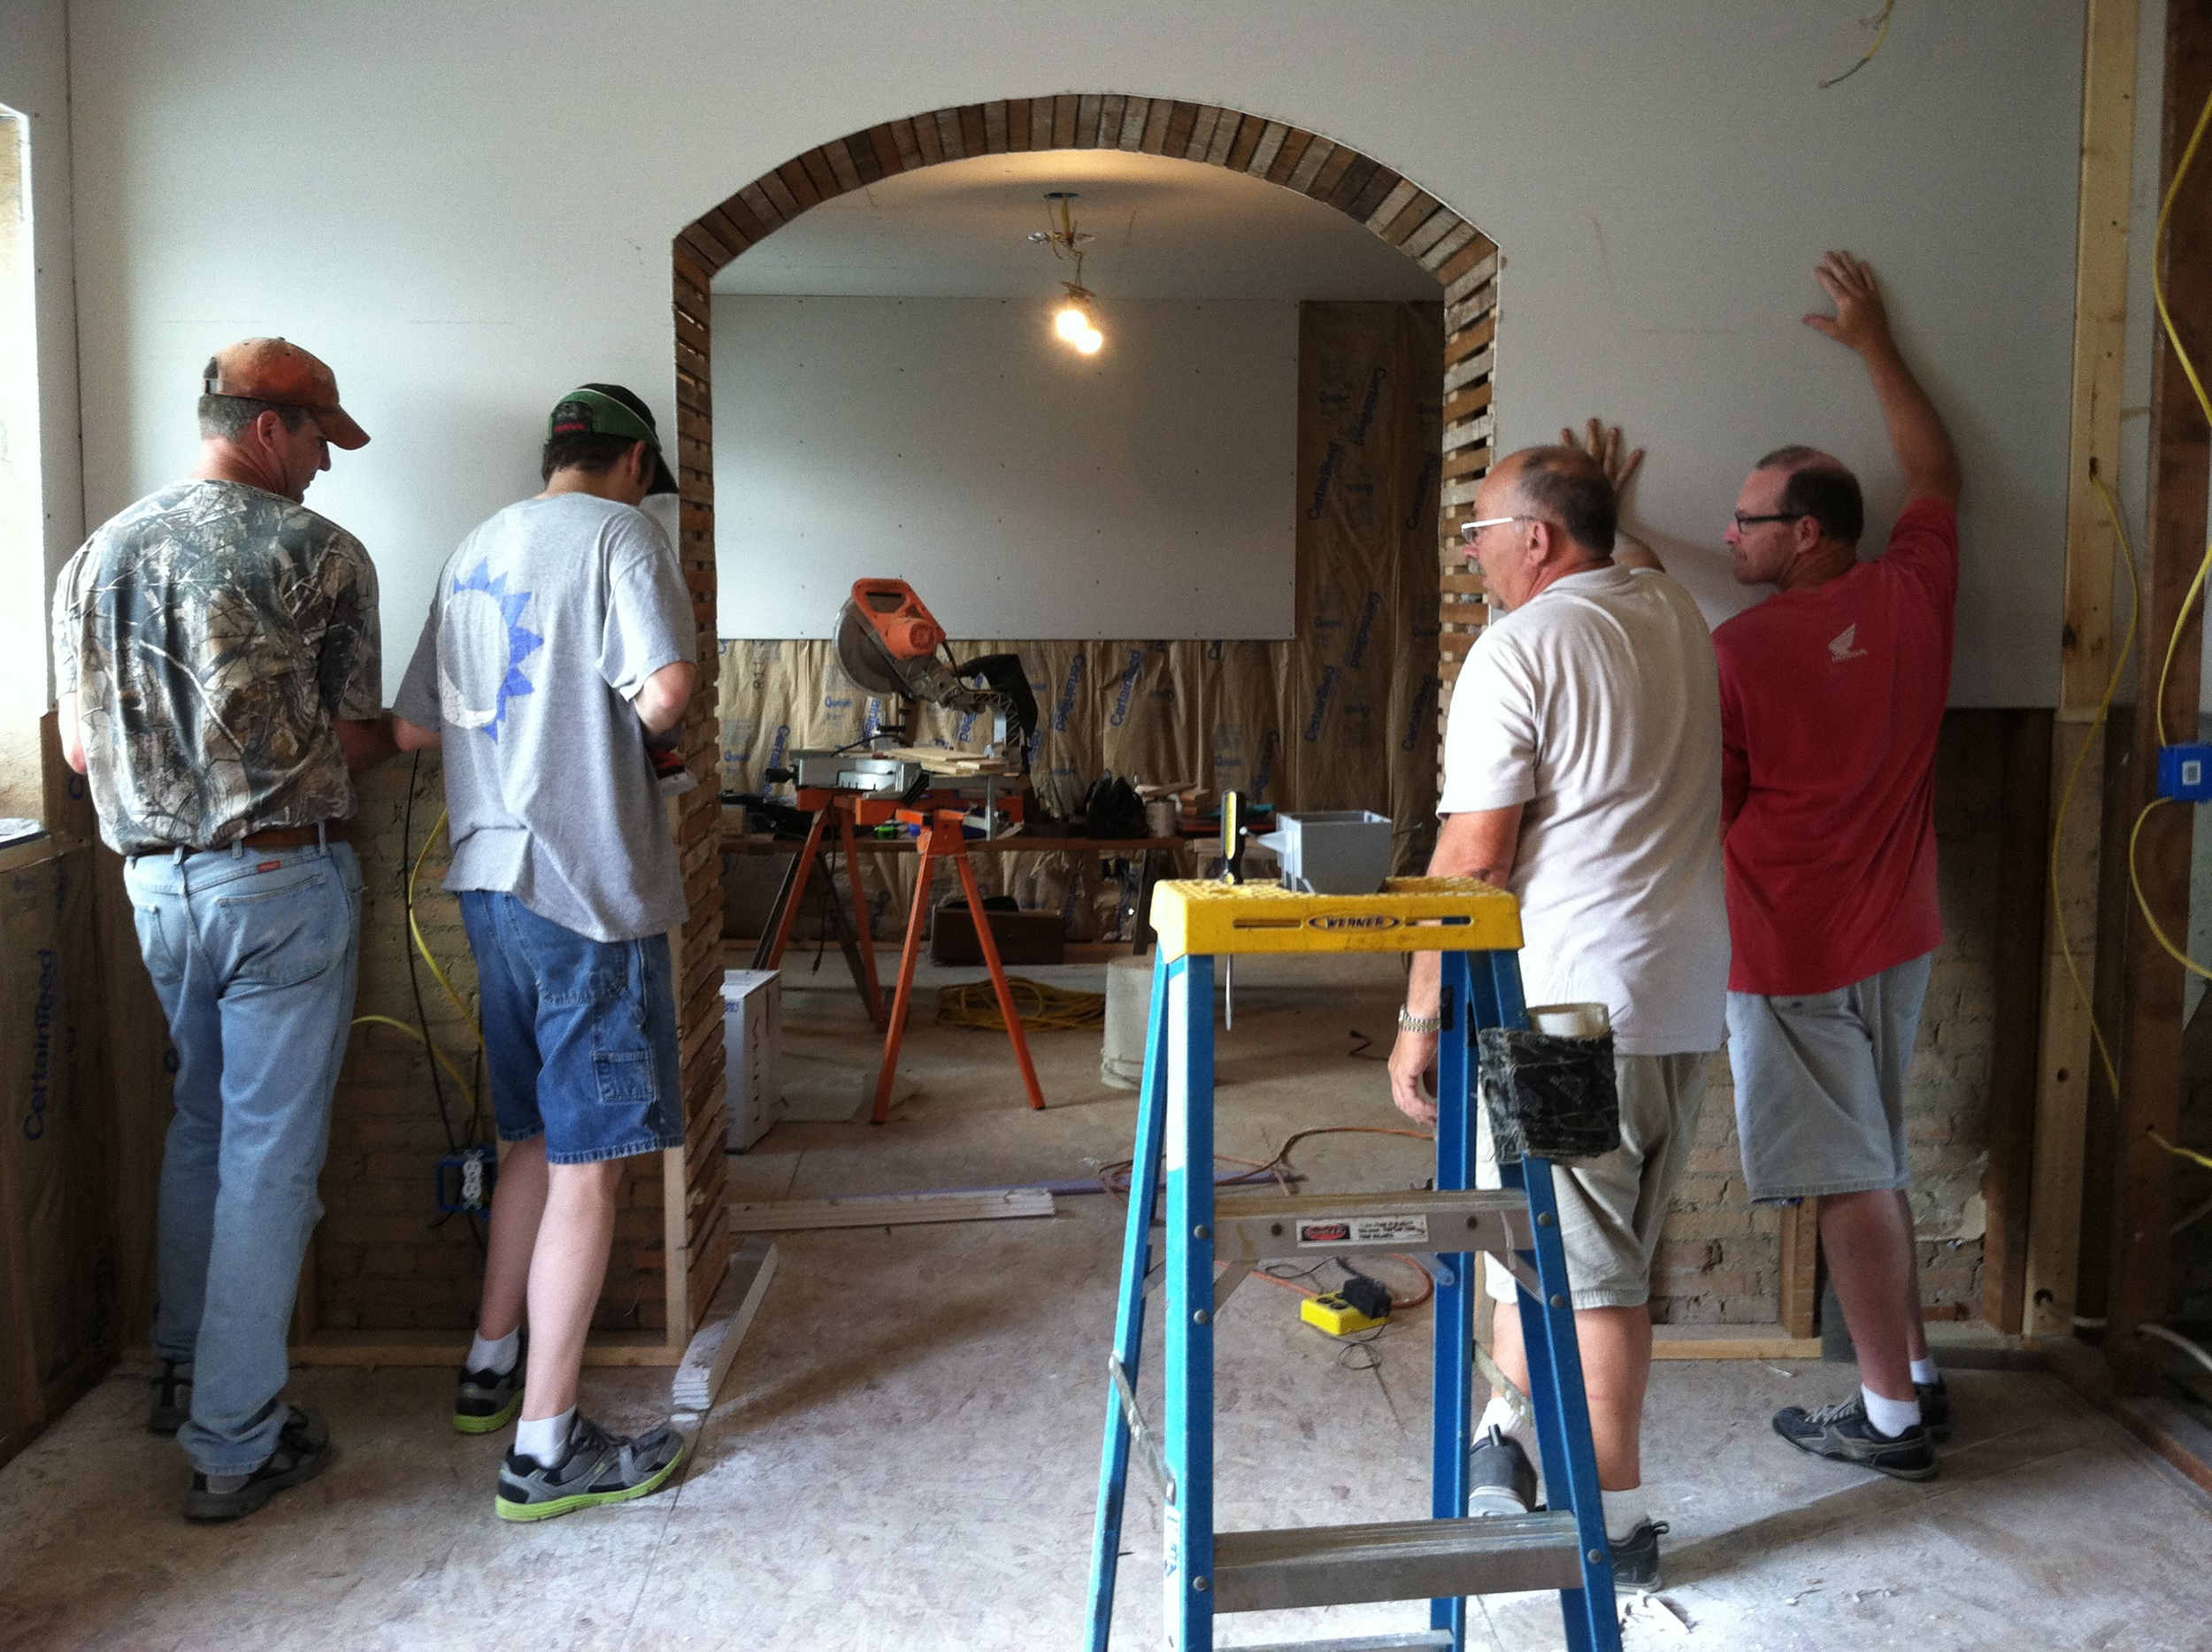 July 2013 - The Drywallers